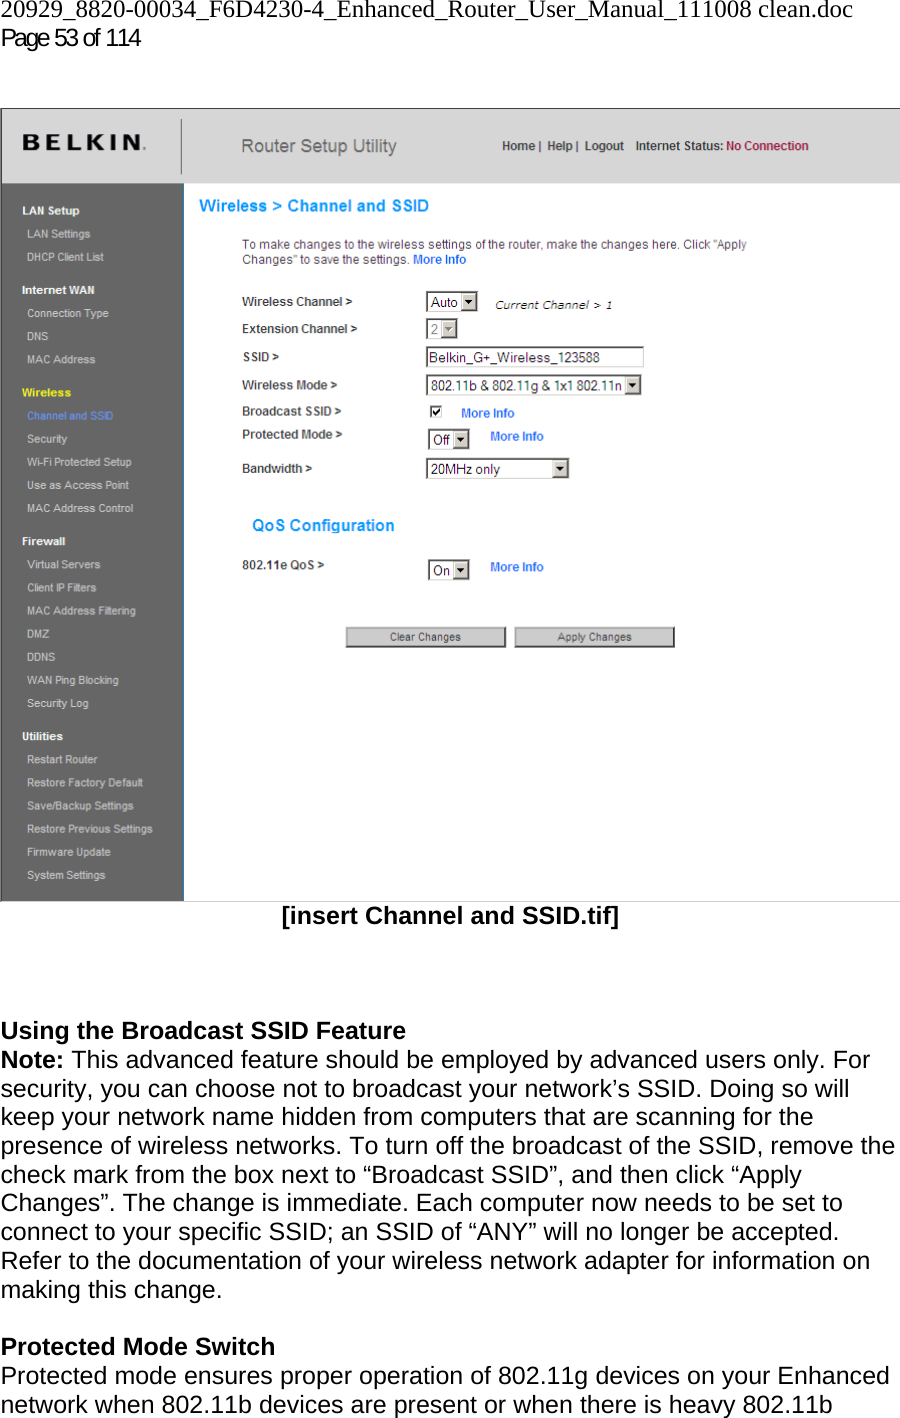 20929_8820-00034_F6D4230-4_Enhanced_Router_User_Manual_111008 clean.doc Page 53 of 114     [insert Channel and SSID.tif]    Using the Broadcast SSID Feature Note: This advanced feature should be employed by advanced users only. For security, you can choose not to broadcast your network’s SSID. Doing so will keep your network name hidden from computers that are scanning for the presence of wireless networks. To turn off the broadcast of the SSID, remove the check mark from the box next to “Broadcast SSID”, and then click “Apply Changes”. The change is immediate. Each computer now needs to be set to connect to your specific SSID; an SSID of “ANY” will no longer be accepted. Refer to the documentation of your wireless network adapter for information on making this change.  Protected Mode Switch Protected mode ensures proper operation of 802.11g devices on your Enhanced network when 802.11b devices are present or when there is heavy 802.11b 